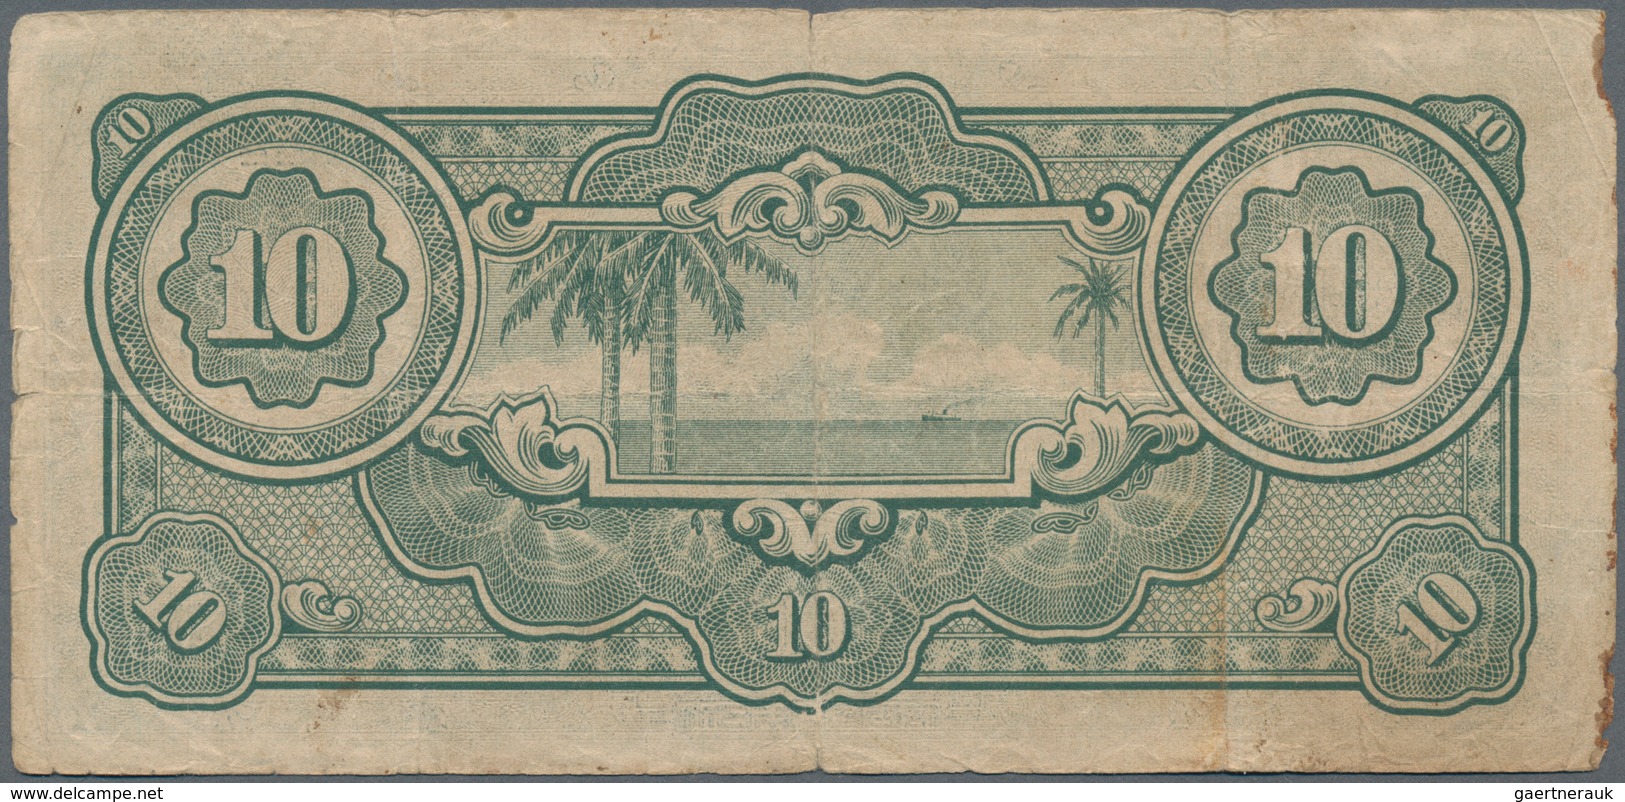 Malaya: The Japanese Government Set With 4 Banknotes 10 Dollars ND(1942-44), P.M7a In F-/F Condition - Malaysie